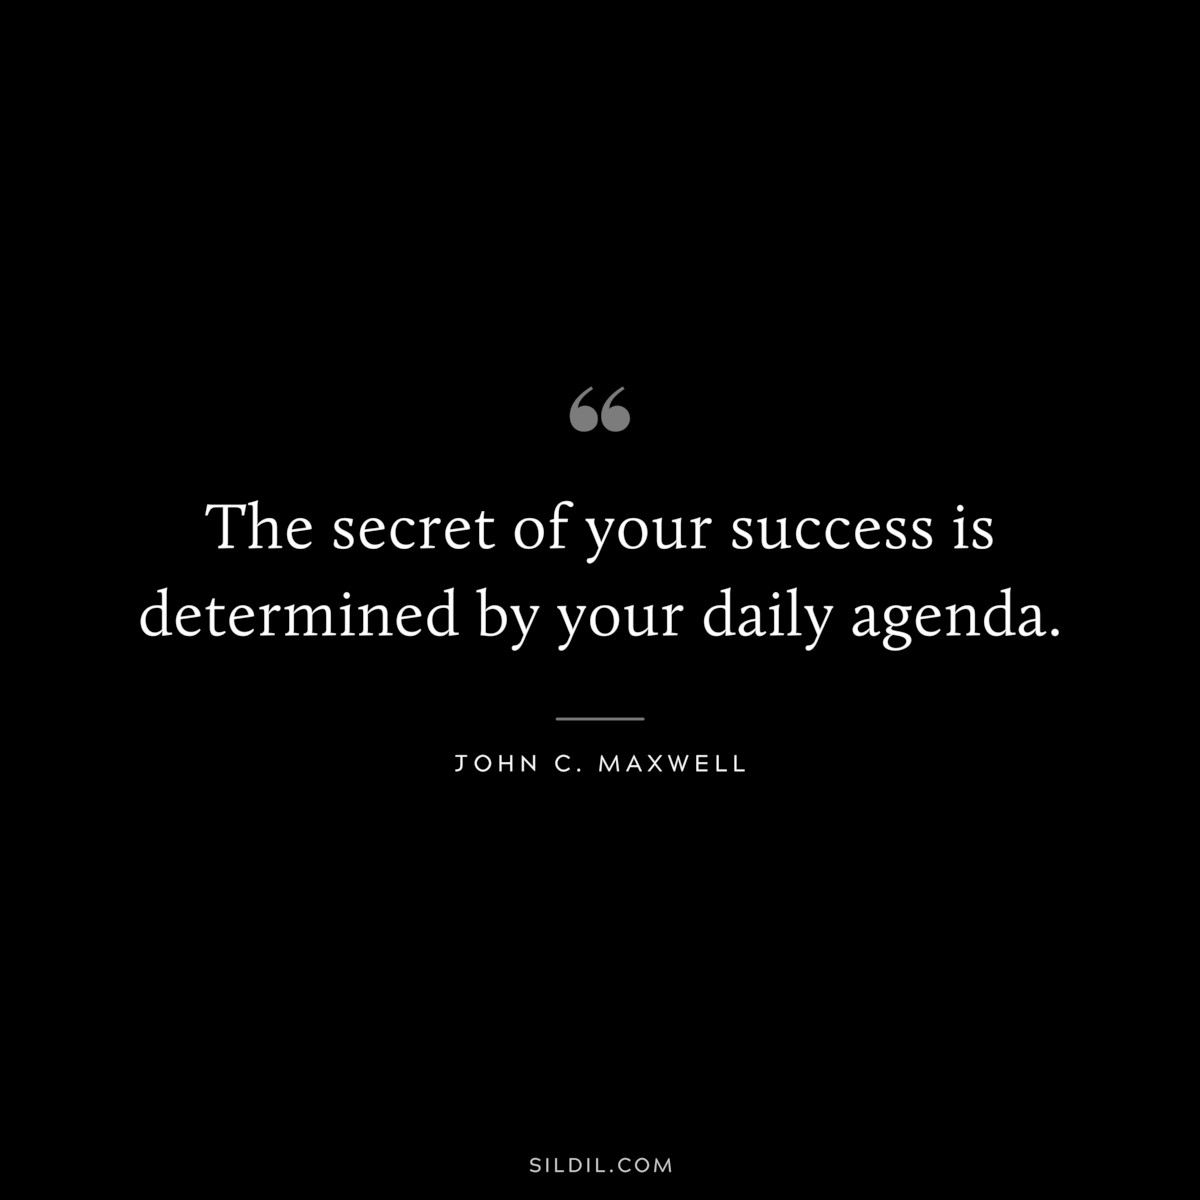 The secret of your success is determined by your daily agenda. ― John C. Maxwell